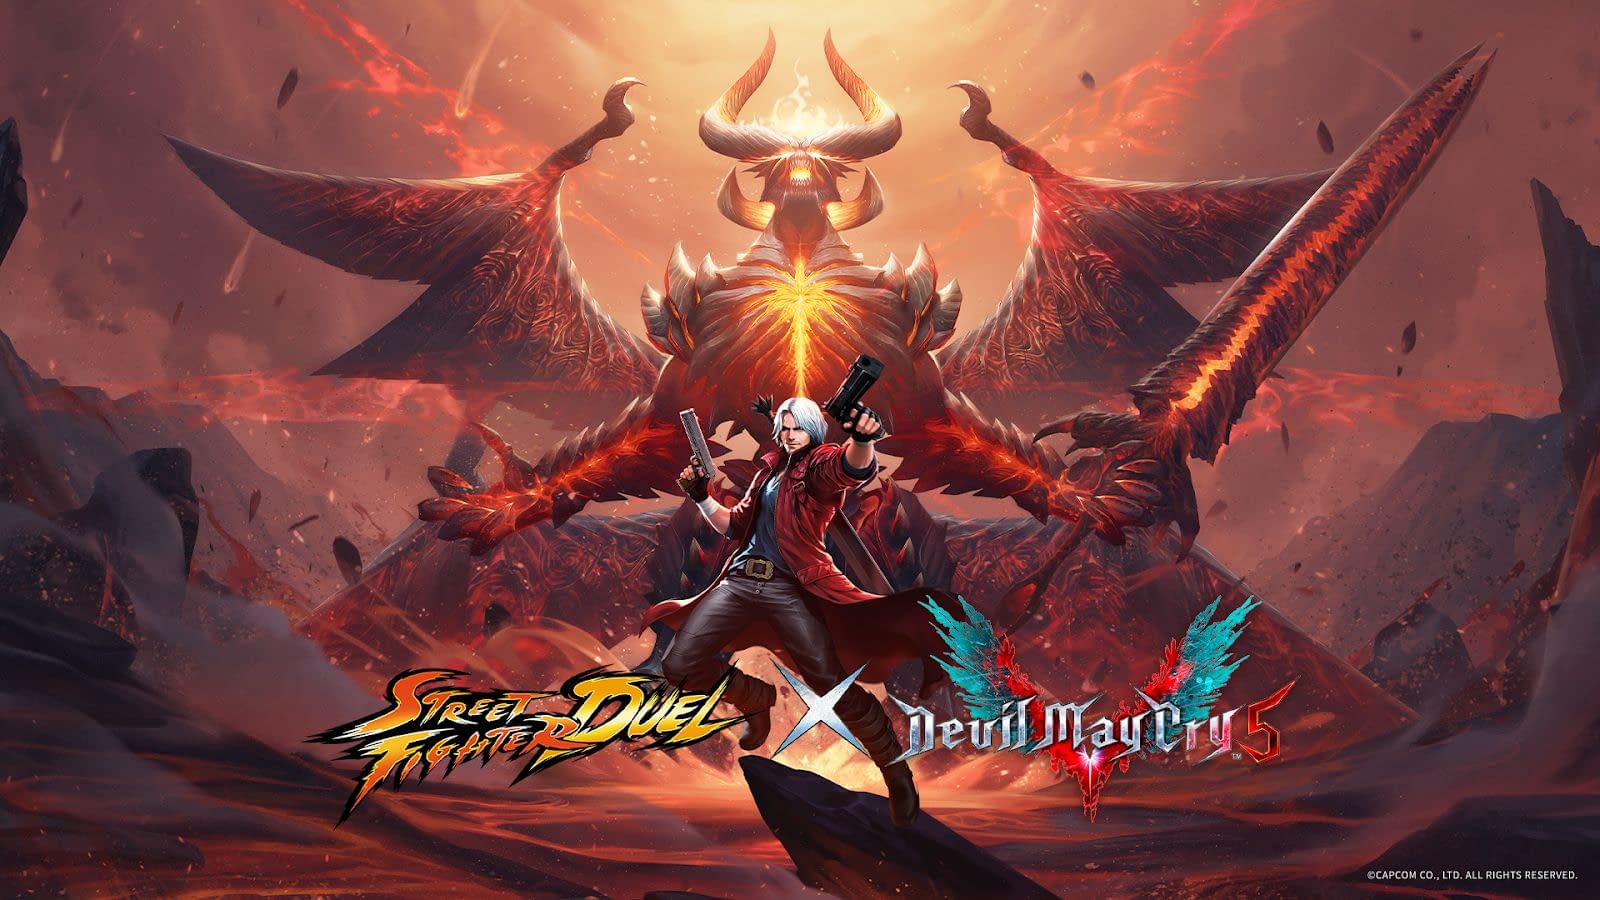 Devil May Cry, Official Announcement, DROP 01